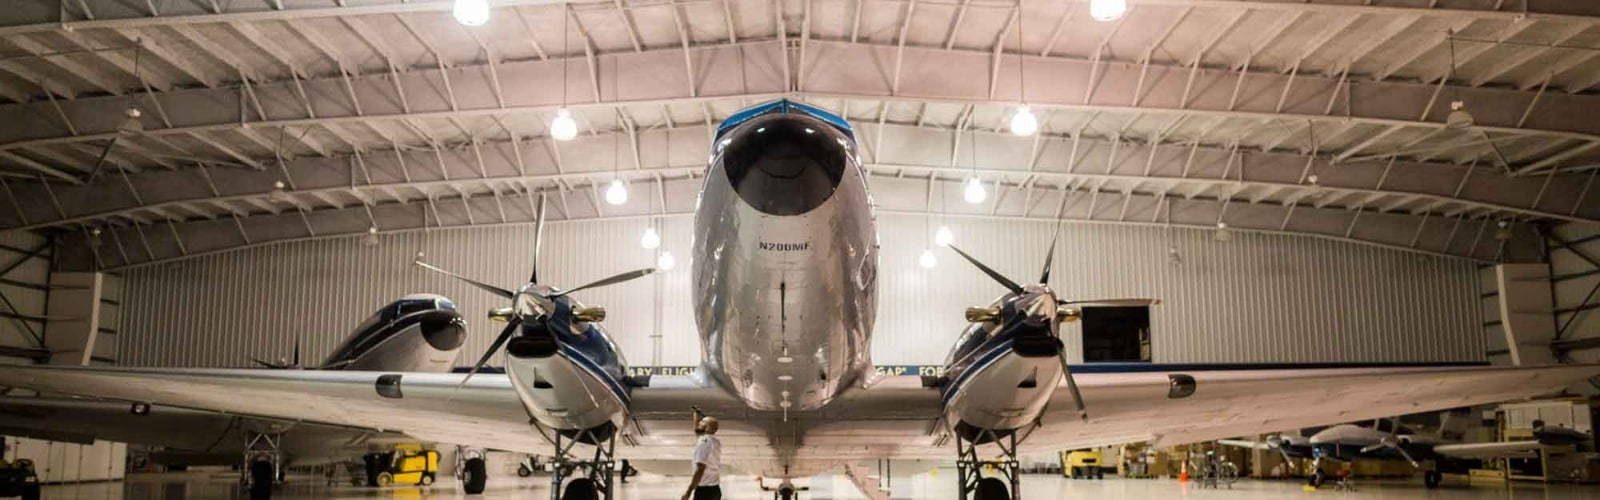 defence force plane stationed in aircraft hanger